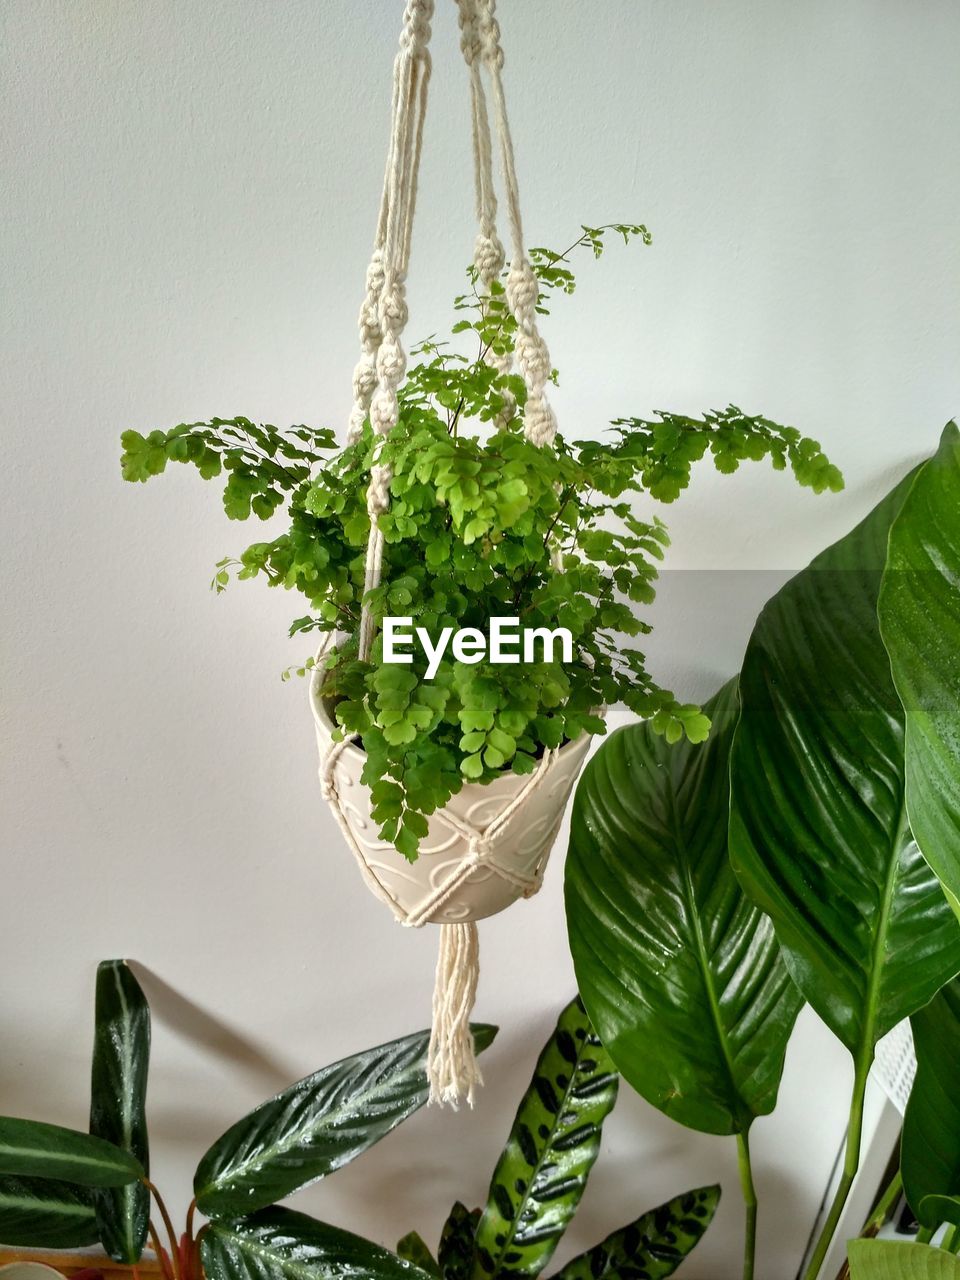 CLOSE-UP OF FRESH WHITE POTTED PLANT HANGING IN CONTAINER